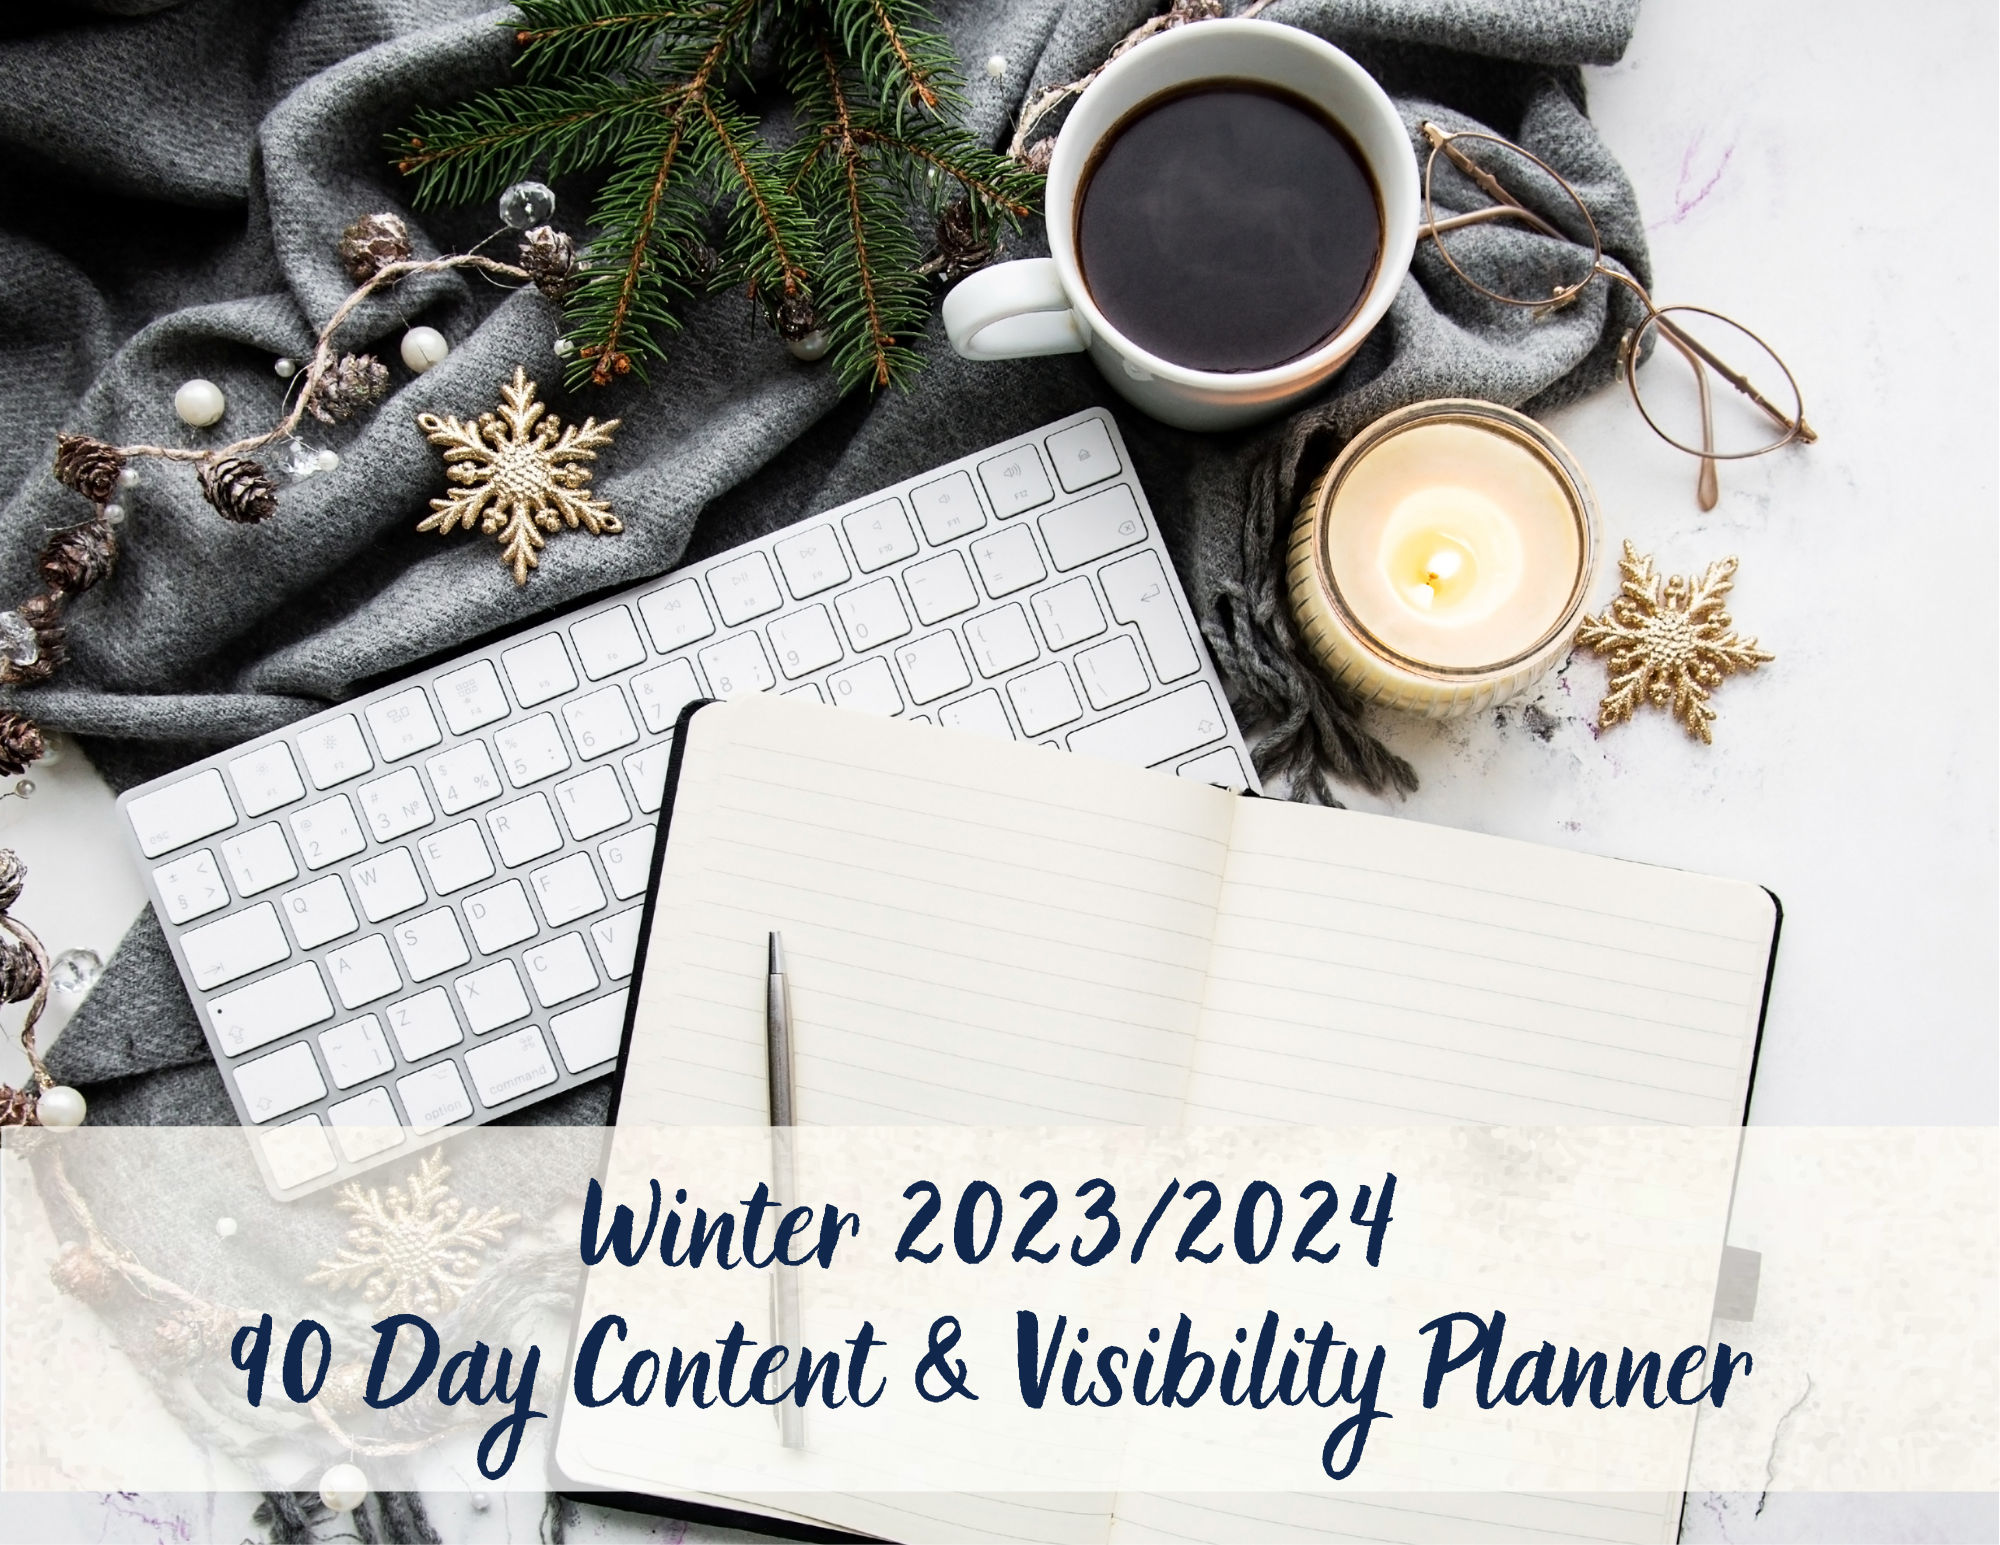 Get your complimentary Autumn 2023 Content and Visibility Planner